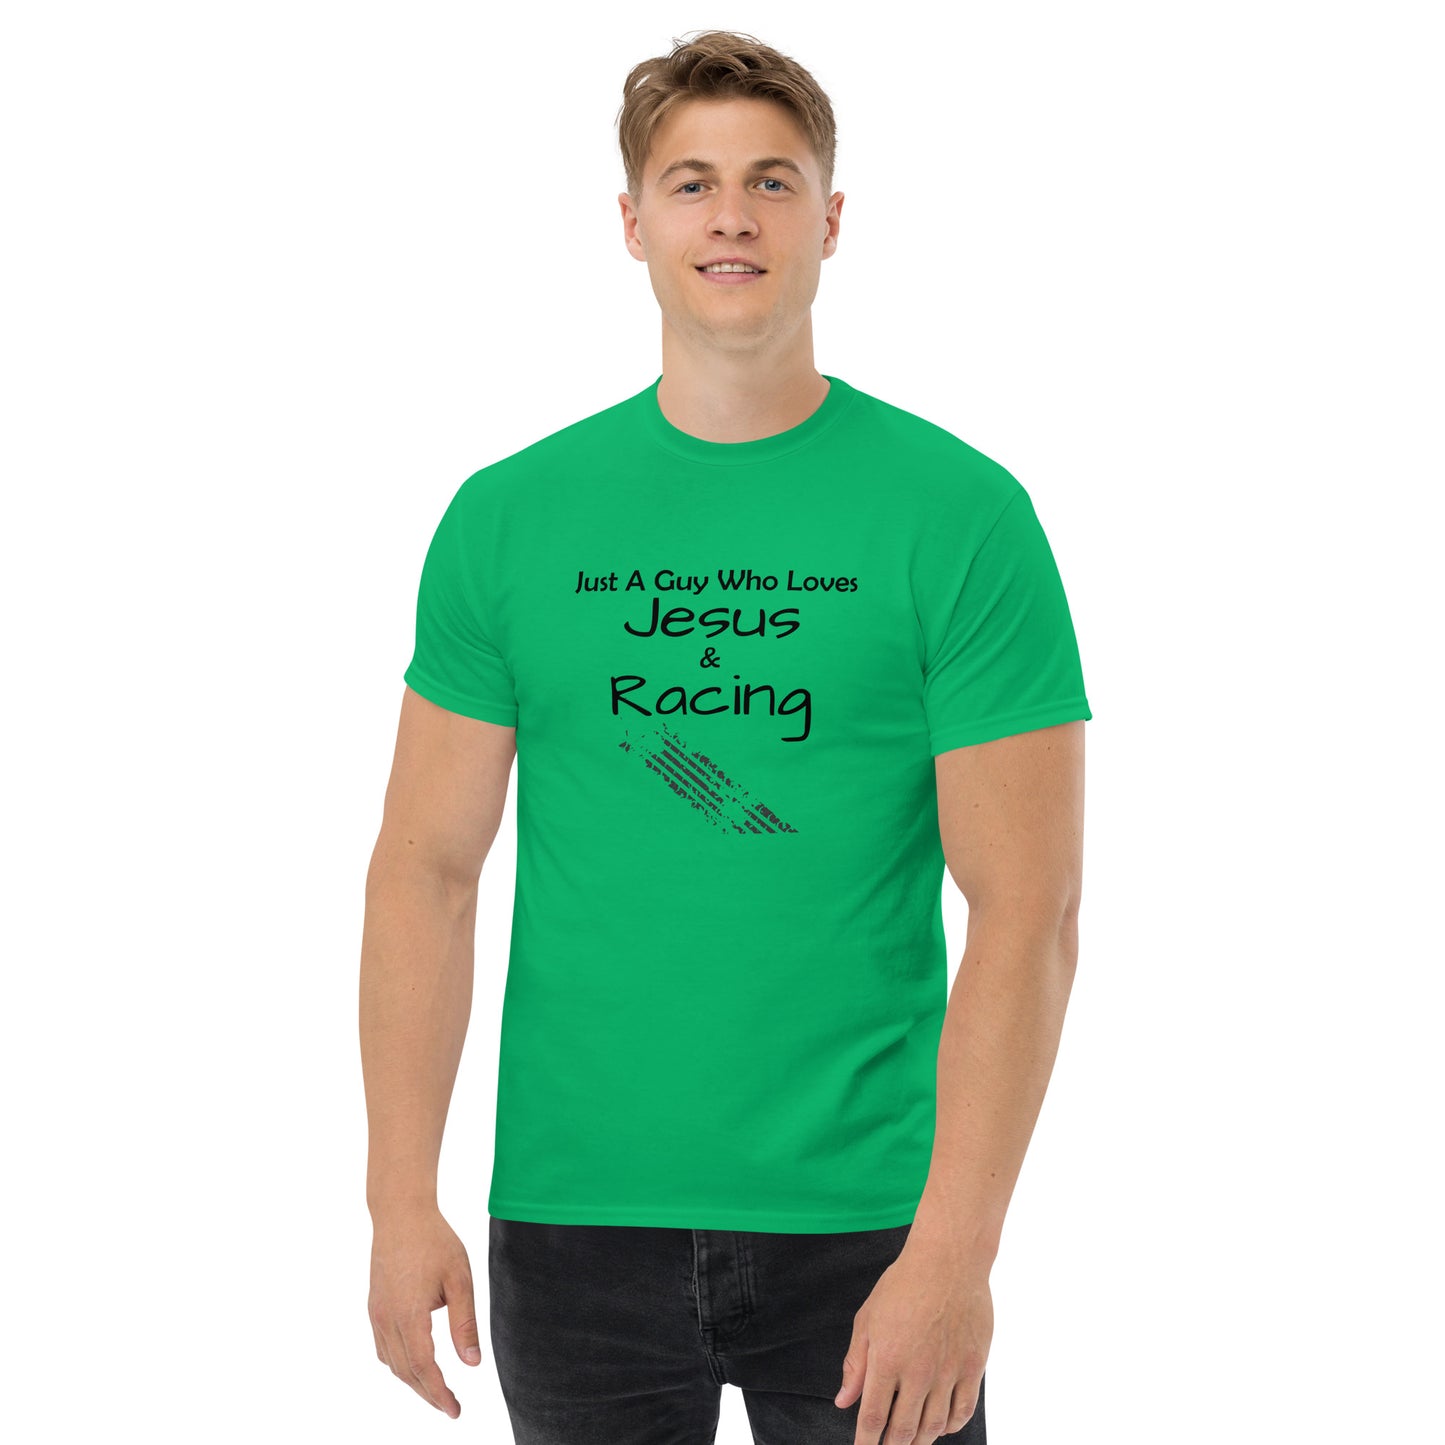 "Just A Guy Who Loves Jesus & Racing" T-Shirt - Weave Got Gifts - Unique Gifts You Won’t Find Anywhere Else!